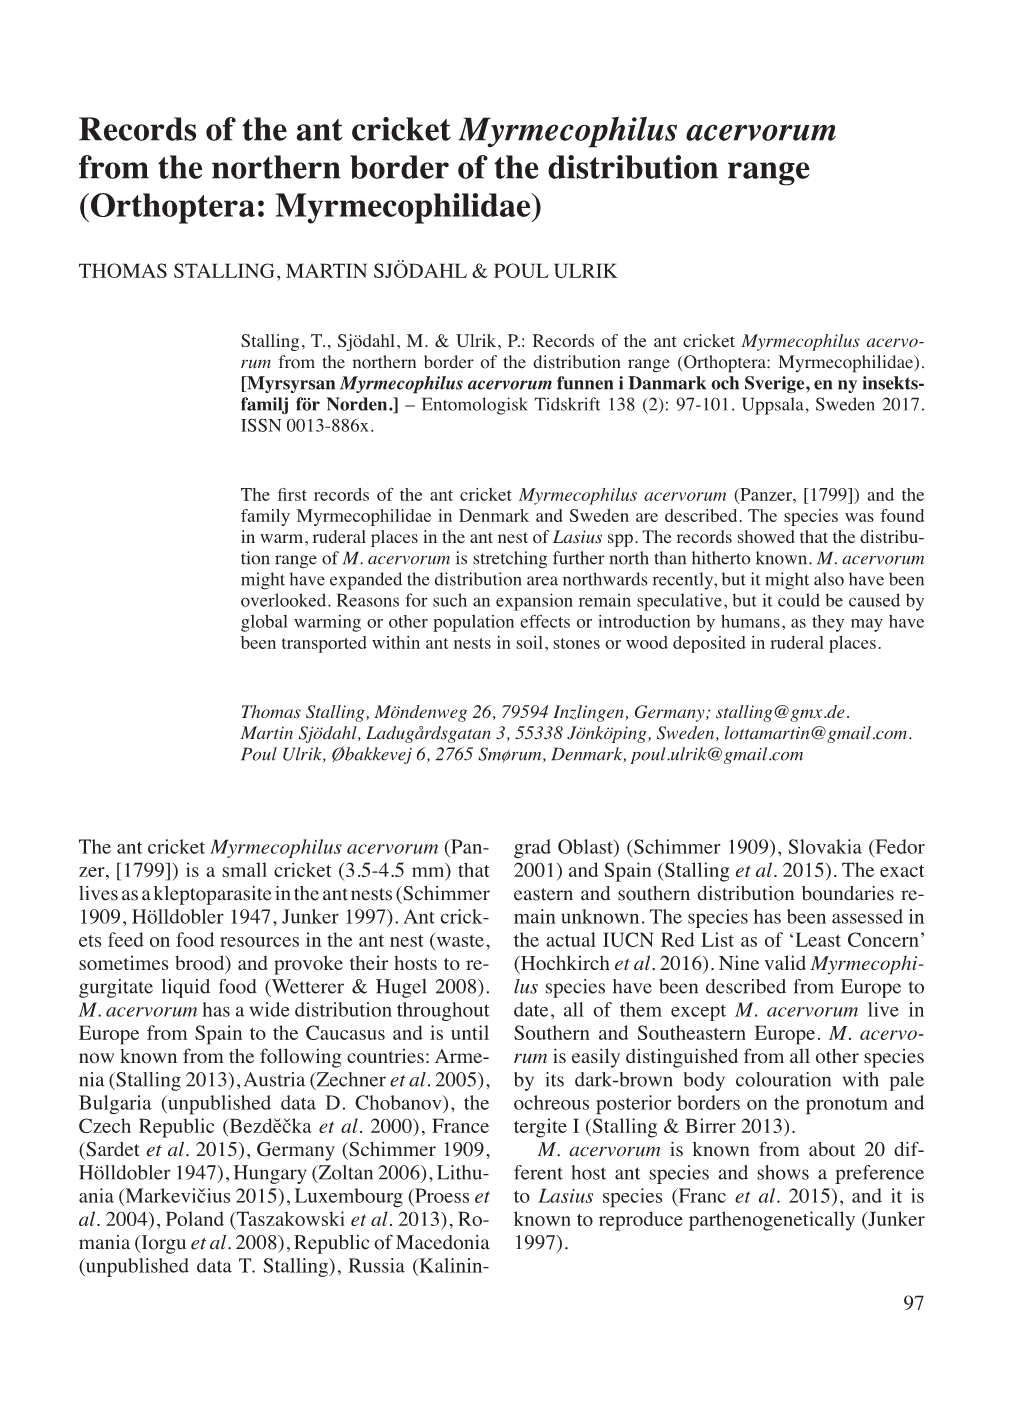 Records of the Ant Cricket Myrmecophilus Acervorum from the Northern Border of the Distribution Range (Orthoptera: Myrmecophilidae)